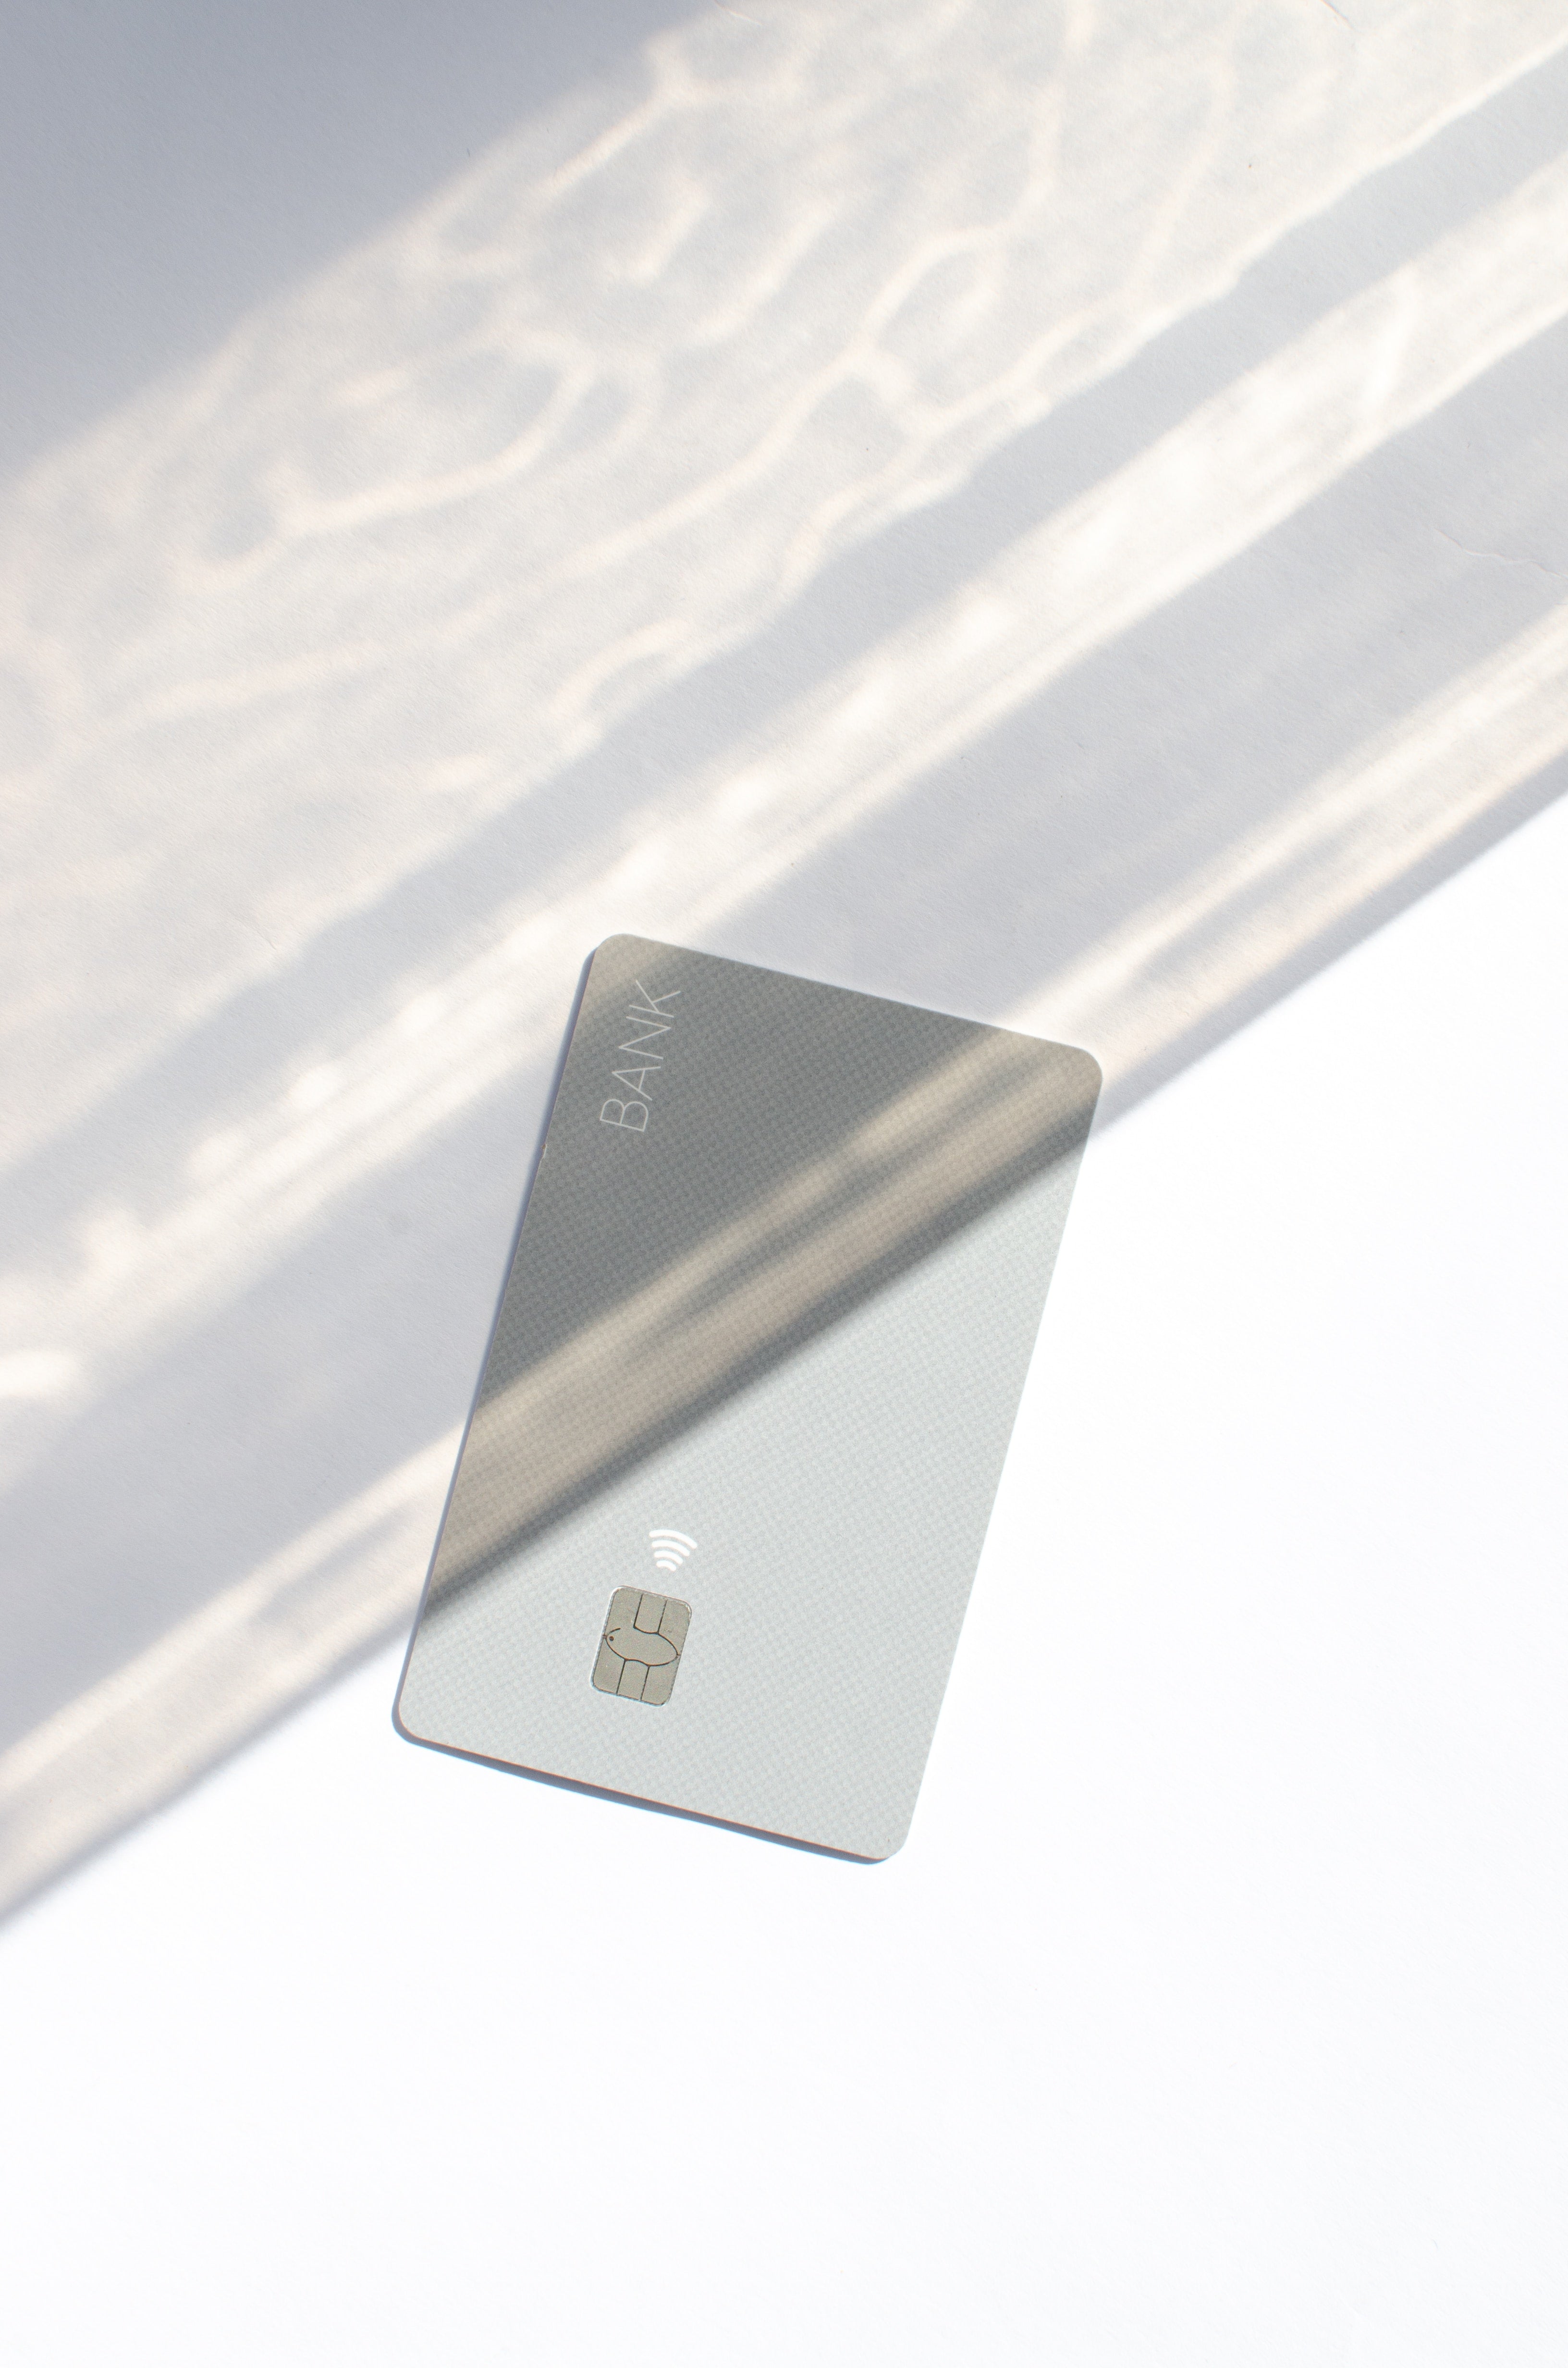 Grey credit card representing online payments and no prepayment